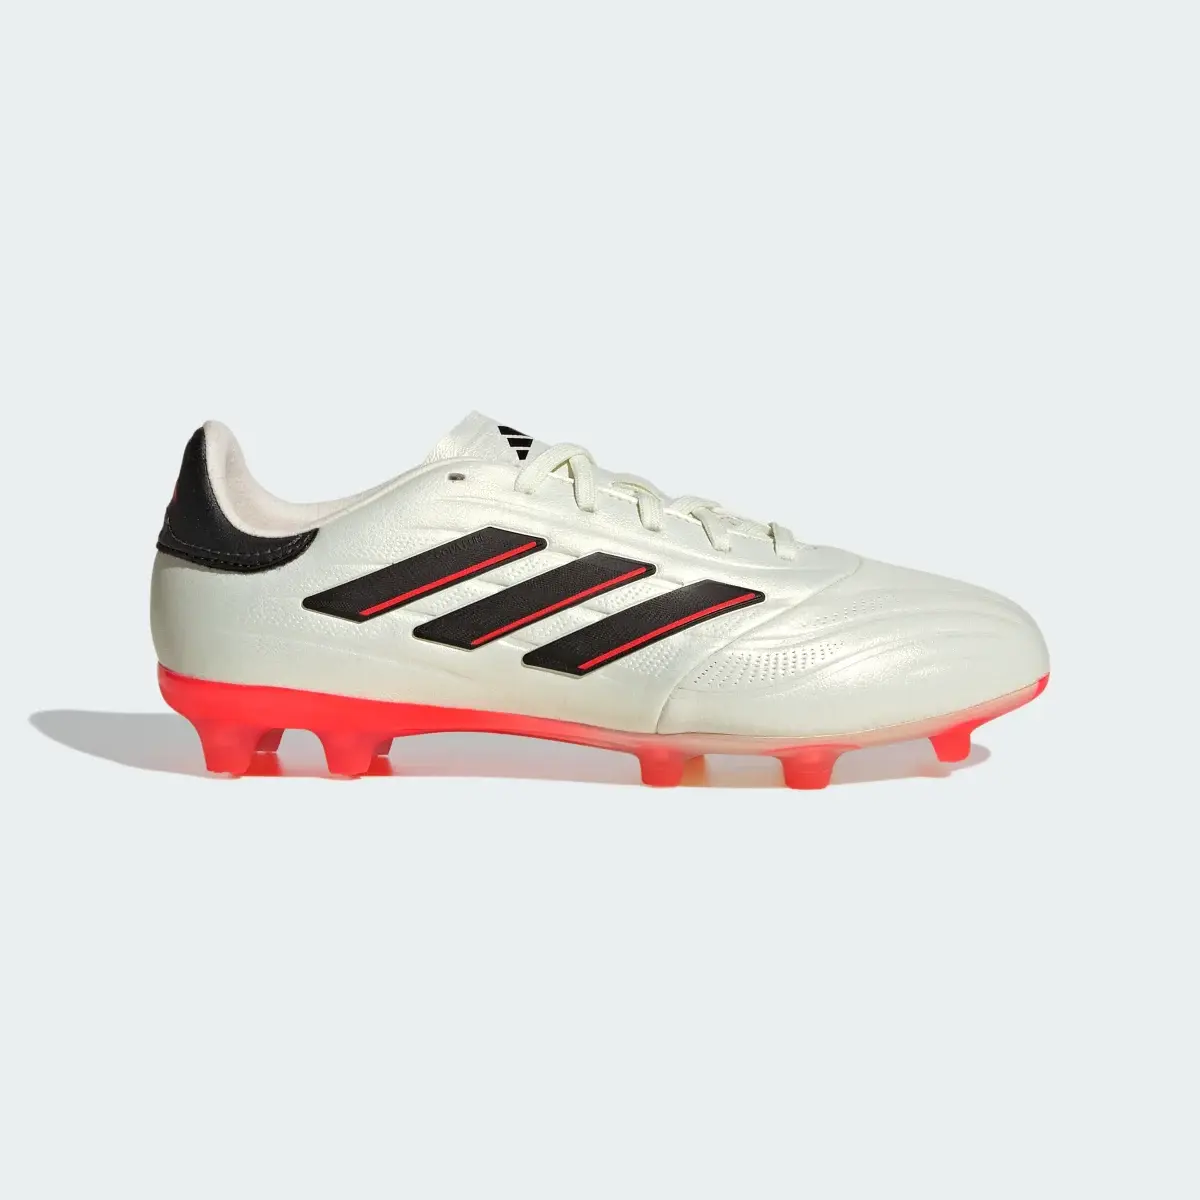 Adidas Copa Pure II Elite Firm Ground Boots. 2